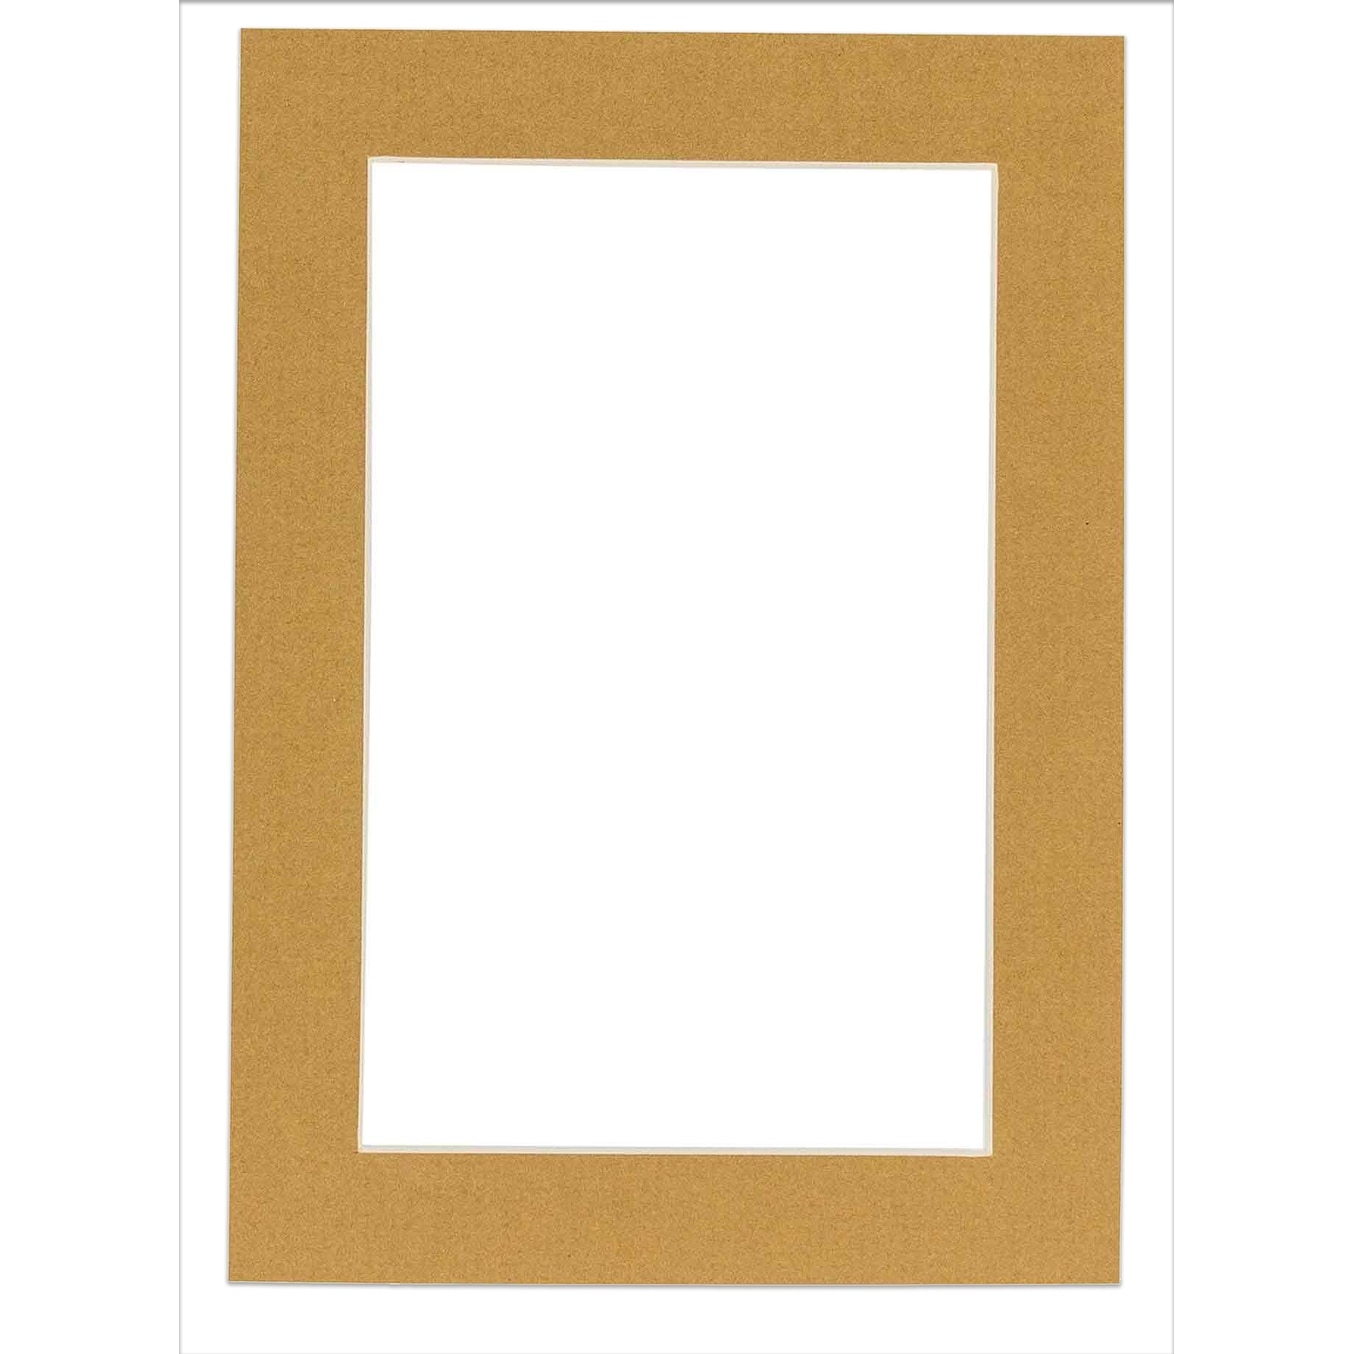 Pack of Ten 20x24 Mats Bevel Cut for 16x22 Photos - Acid Free Yellow Precut Matboards for Pictures, Photos, Framing